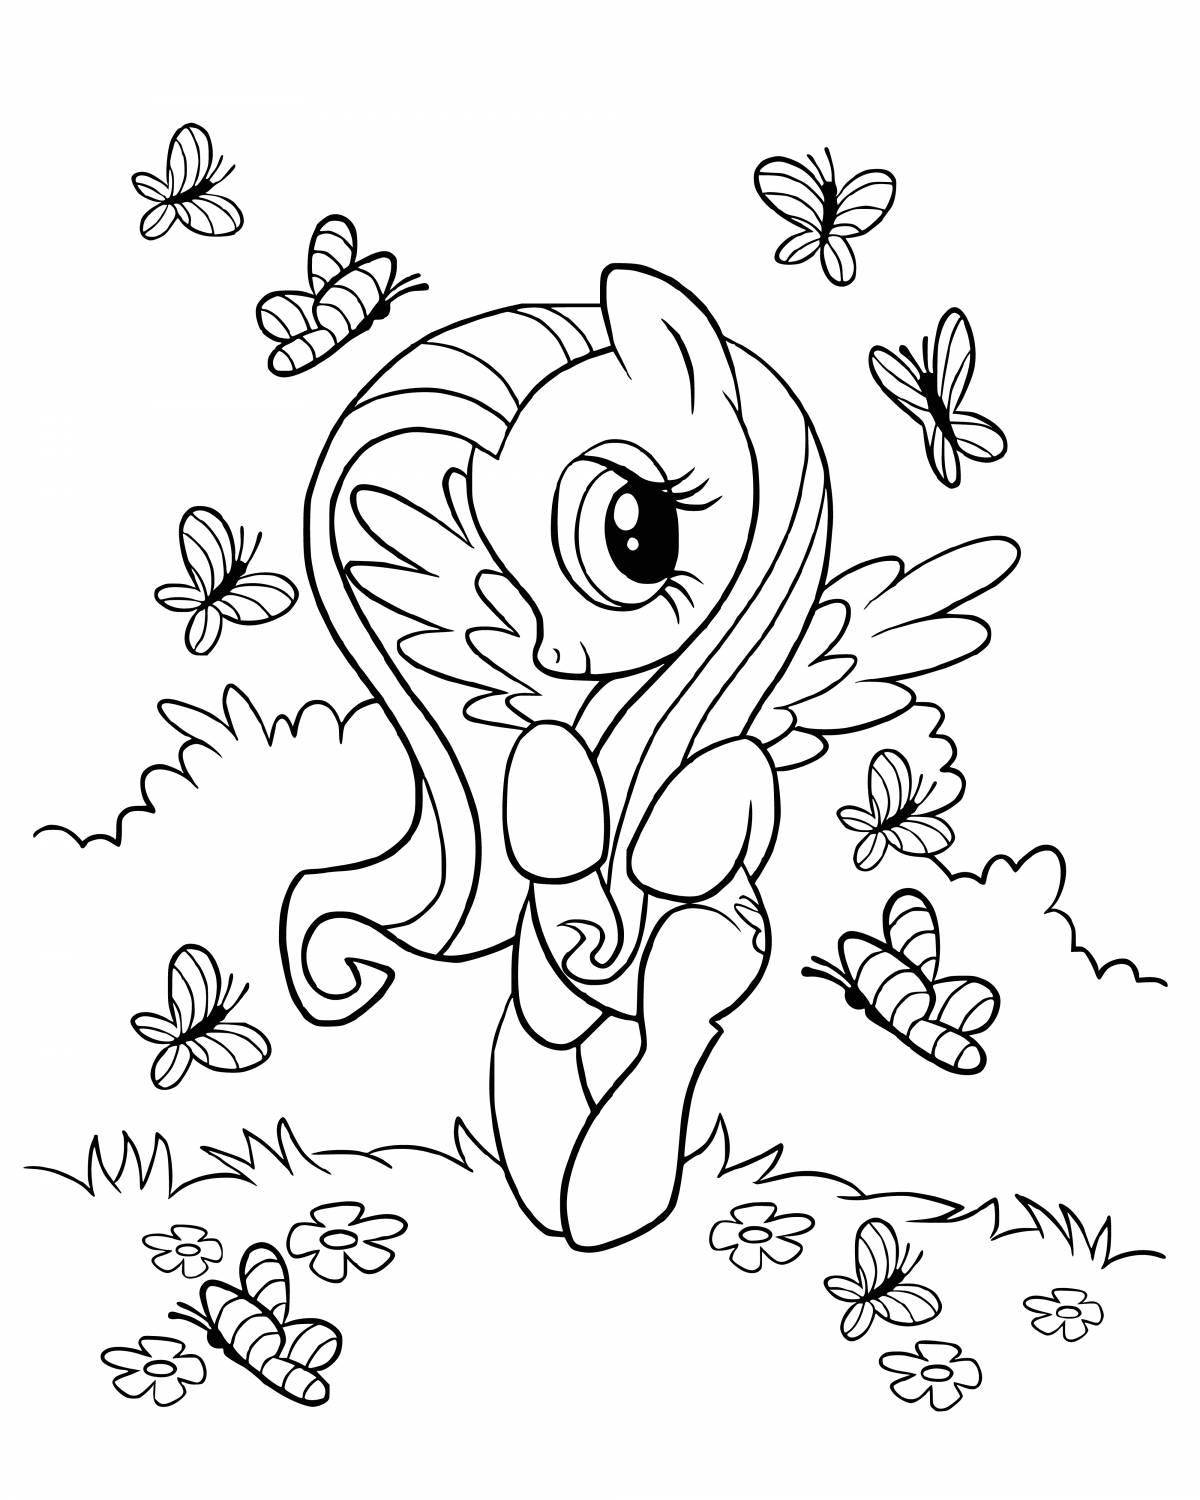 Coloring page nice fluttershy pony